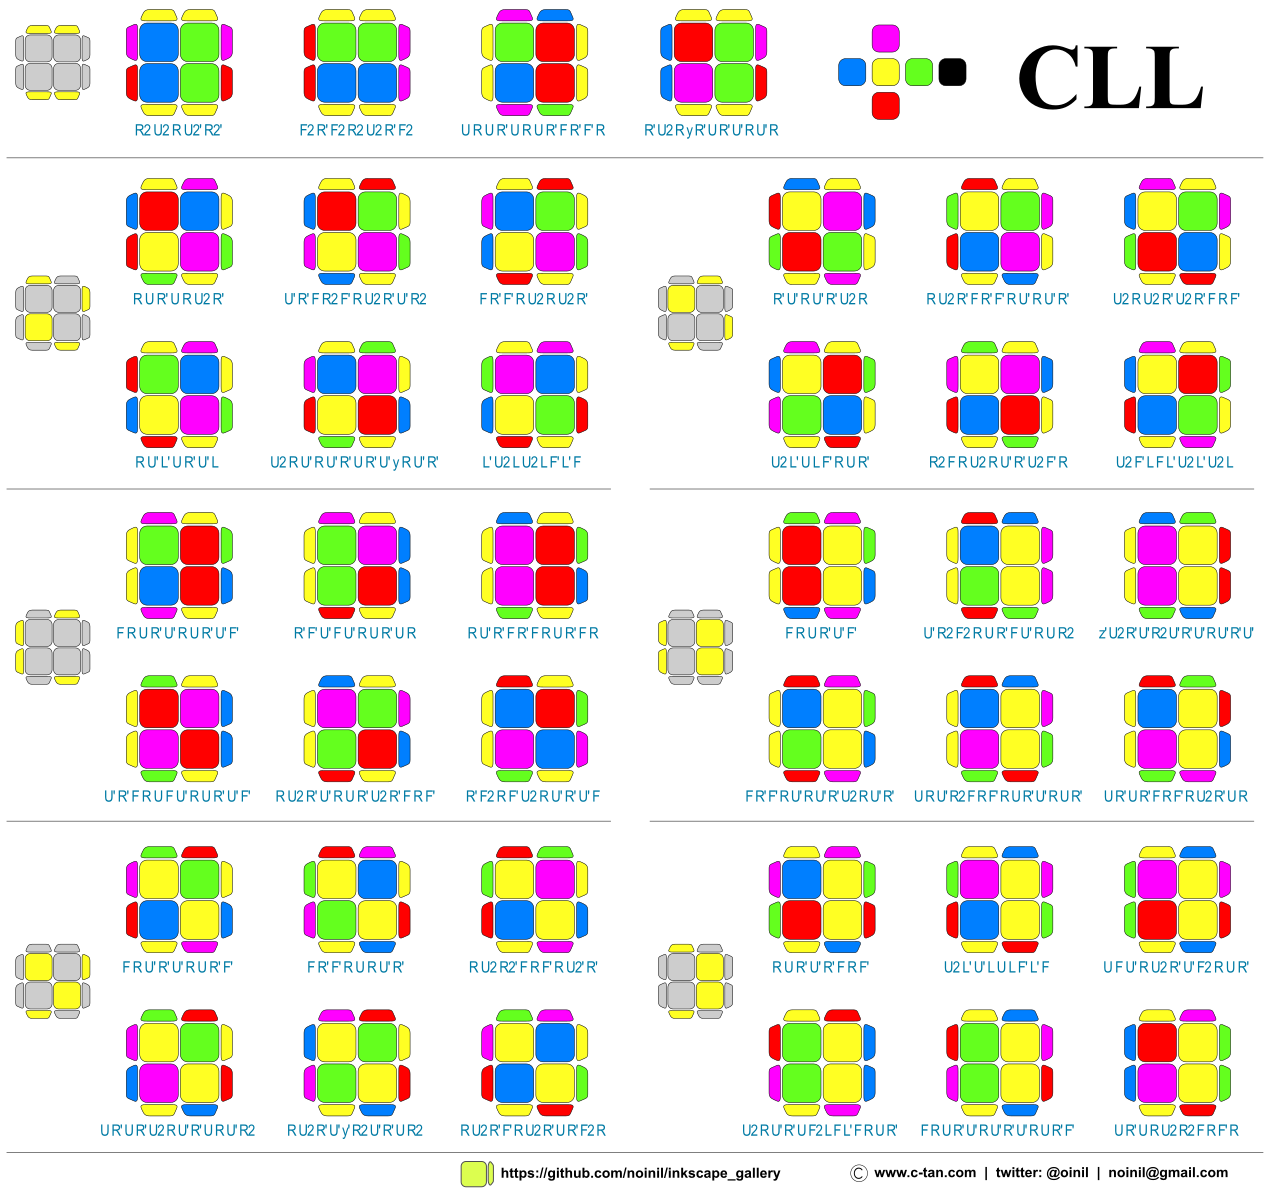 Corners of Last Layer (CLL), is a method that solves the last layer corners...